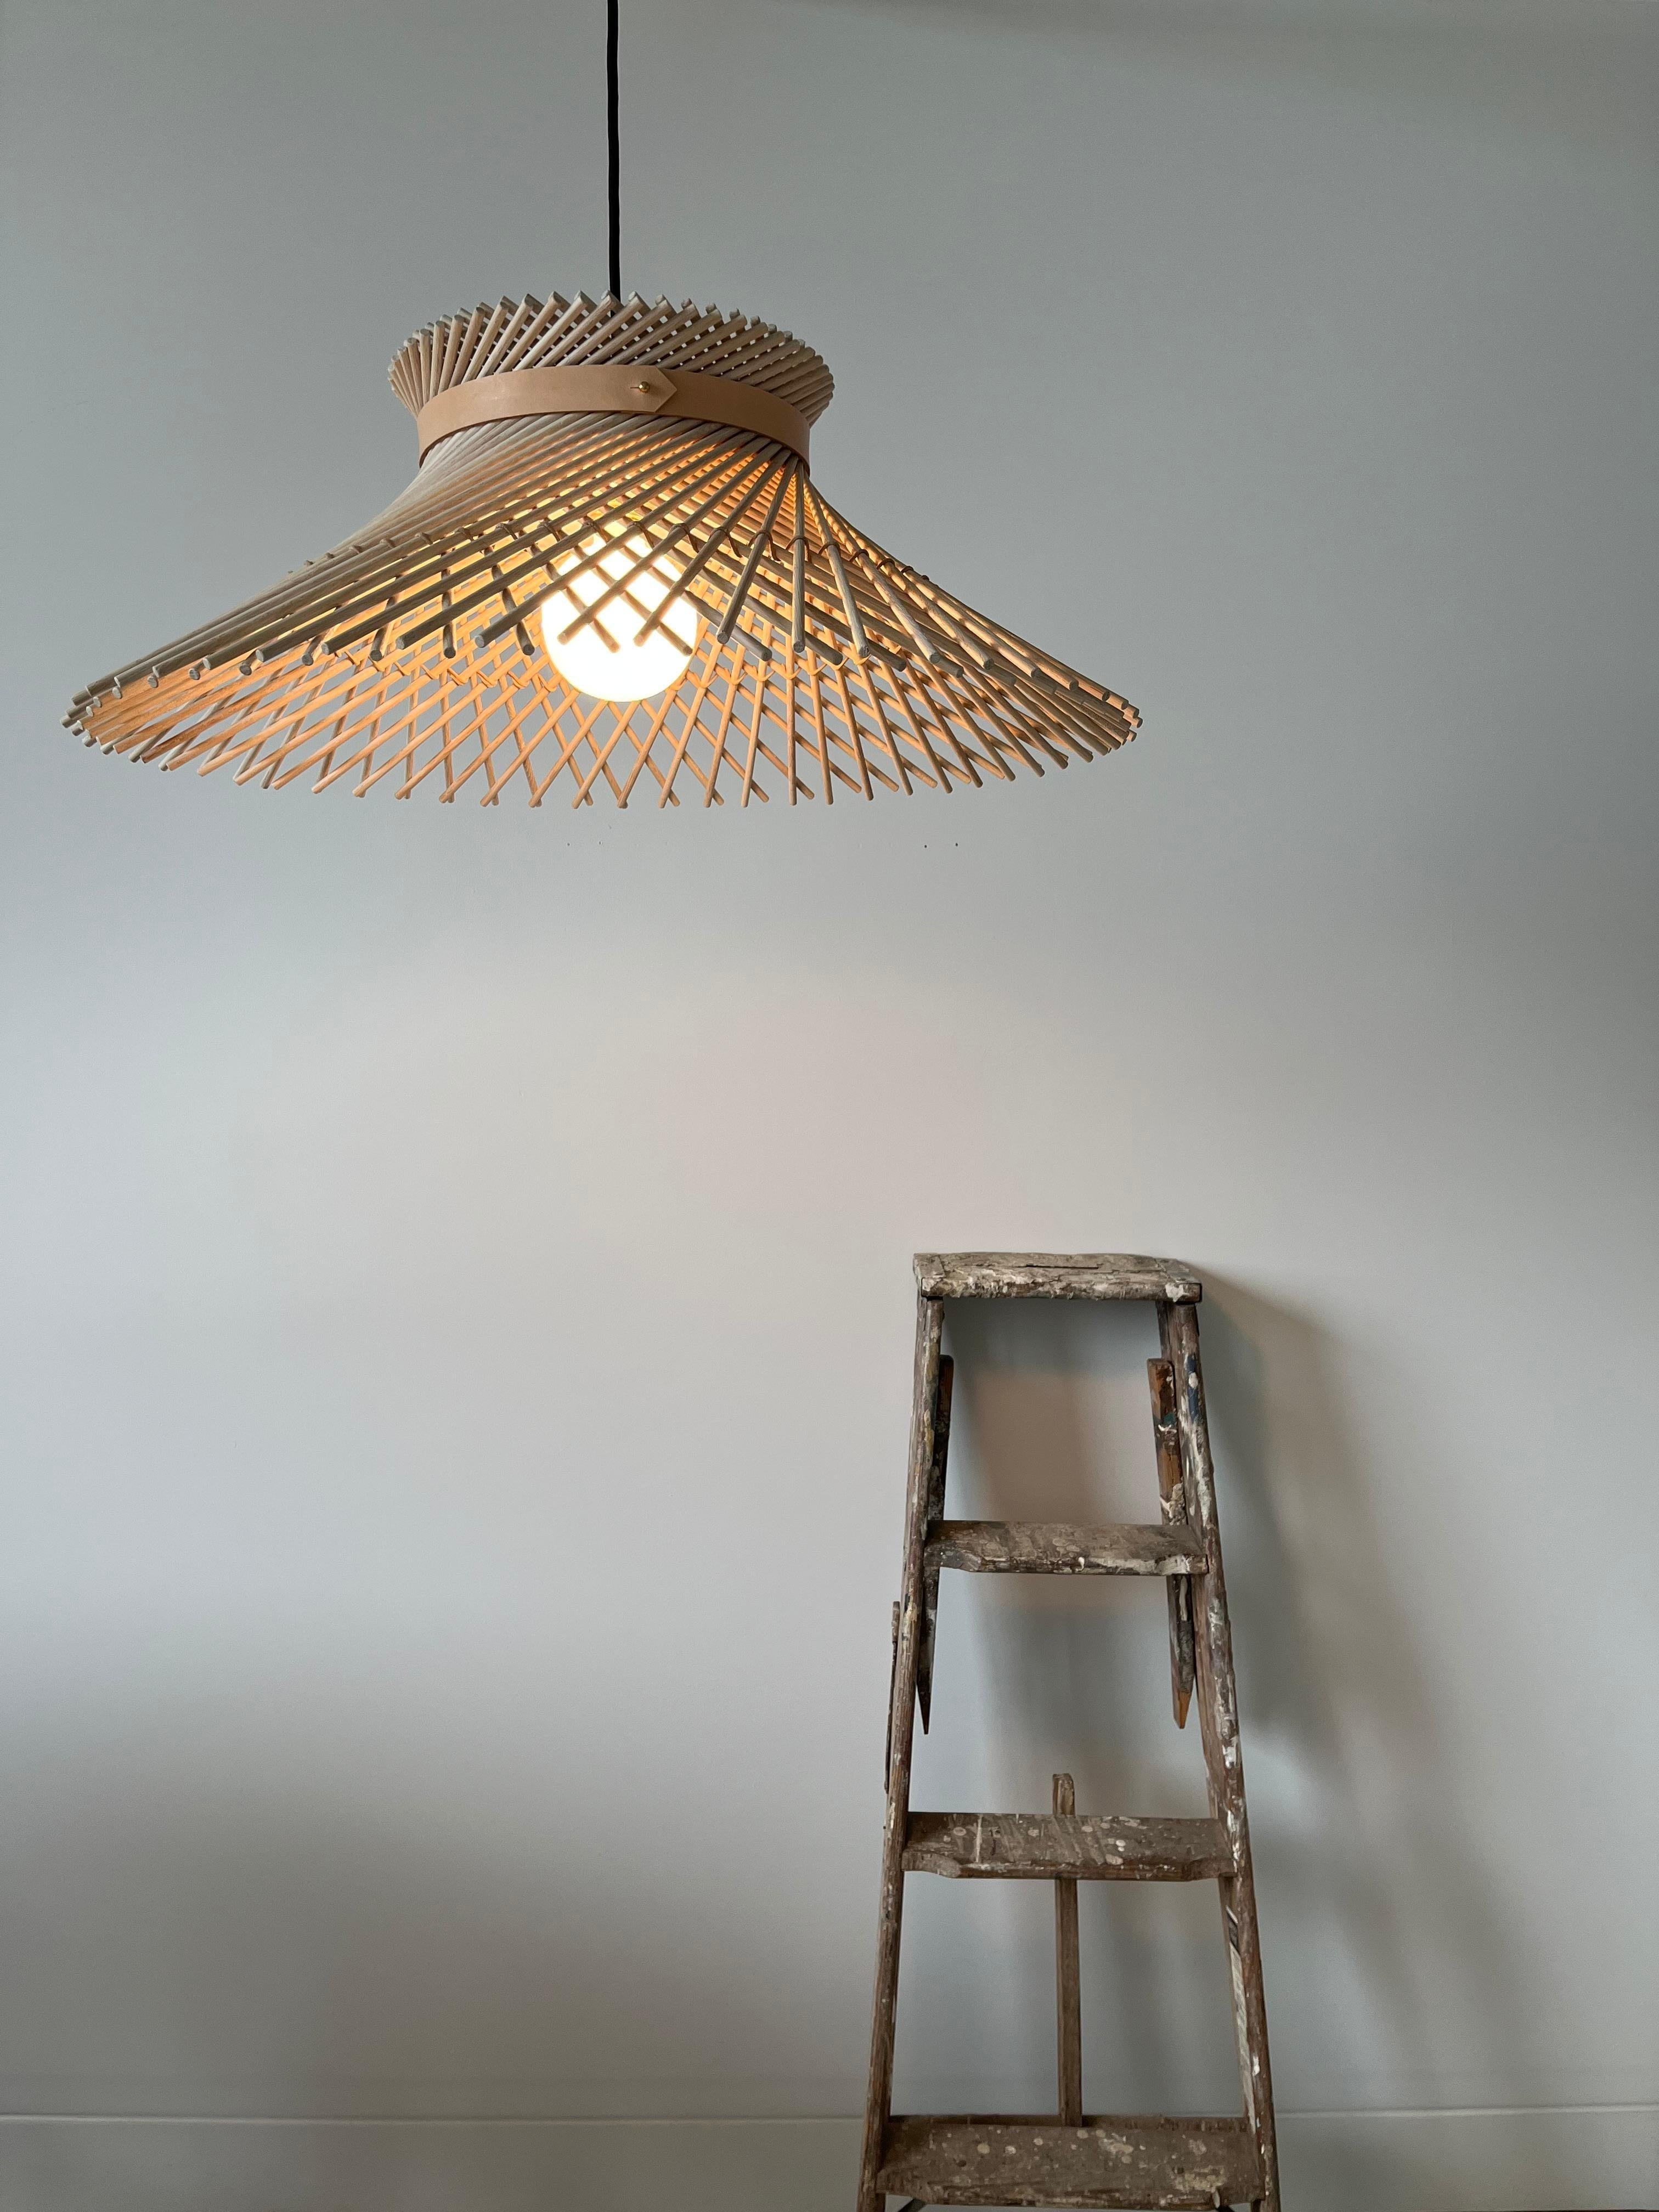 Mooda Ceiling Pendant Light 9 / Natural Oak Wood, Crema Marfil Marble by INDO- In New Condition For Sale In Rumford, RI